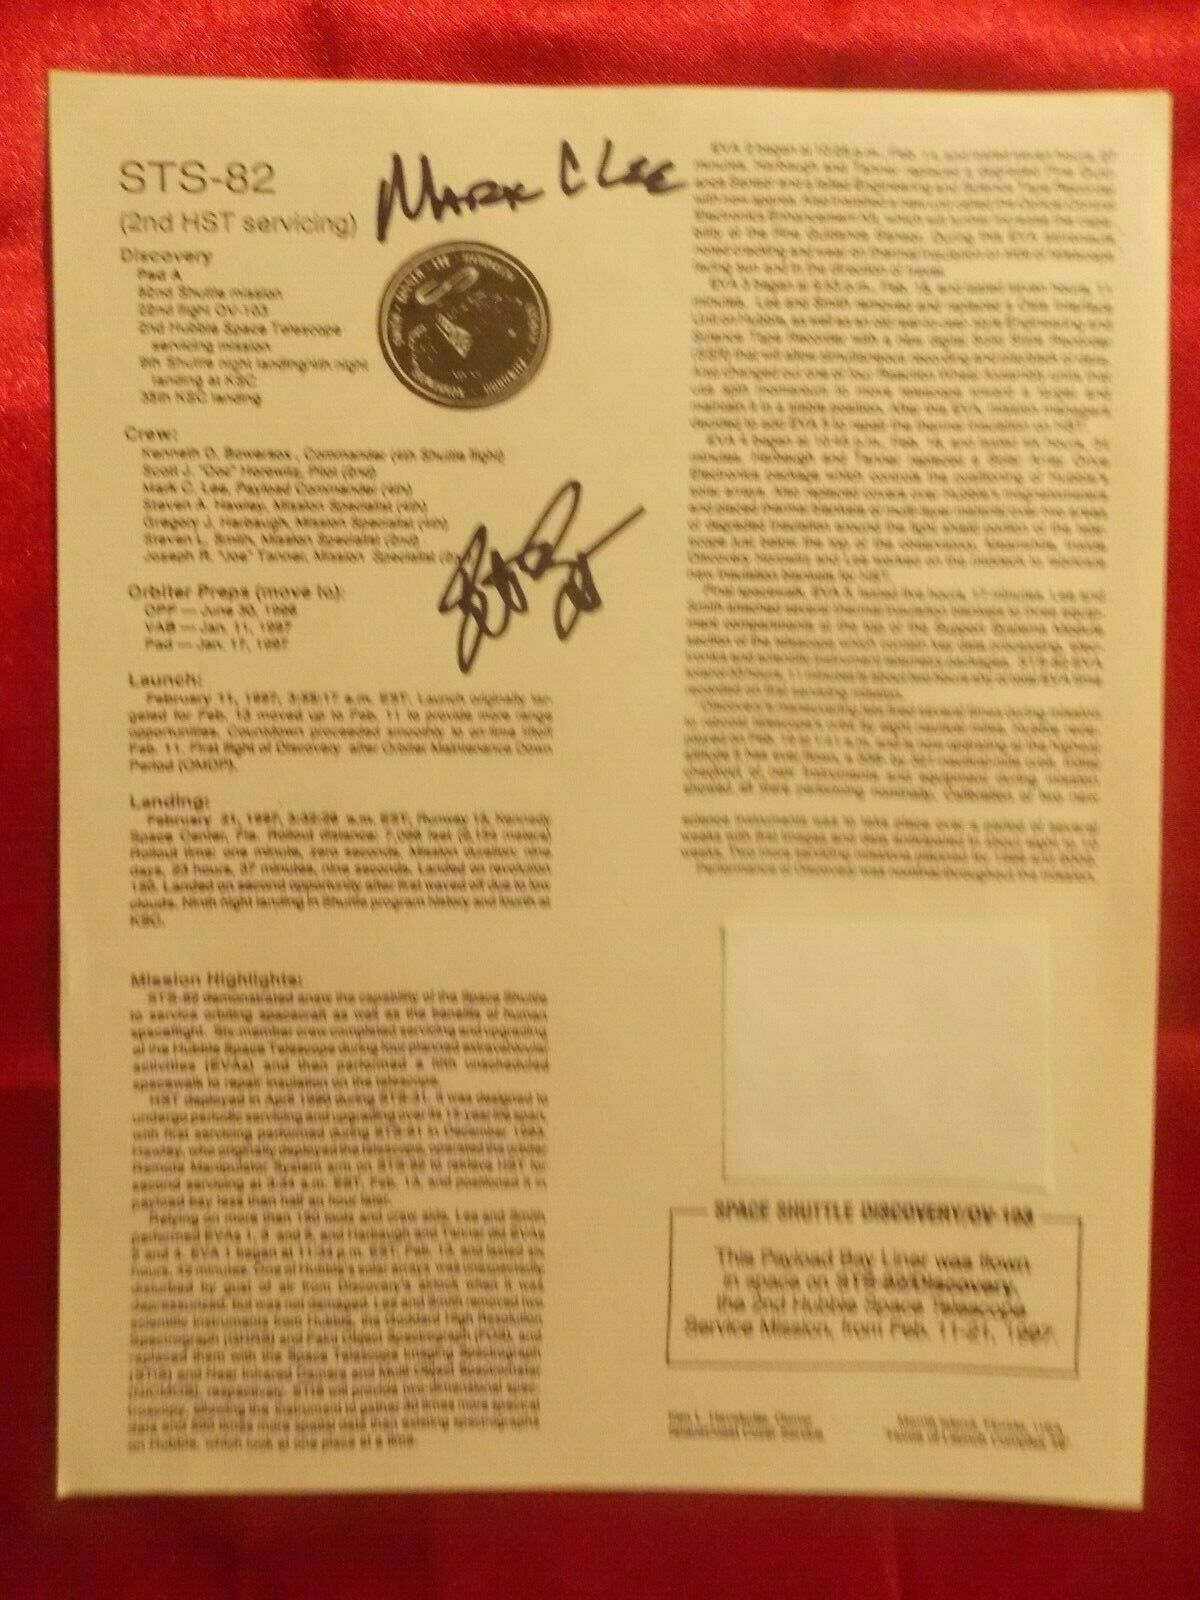 Sts-82 Hubble Telescope Mission Fact Sheet Flown Payload Bay Liner Signed